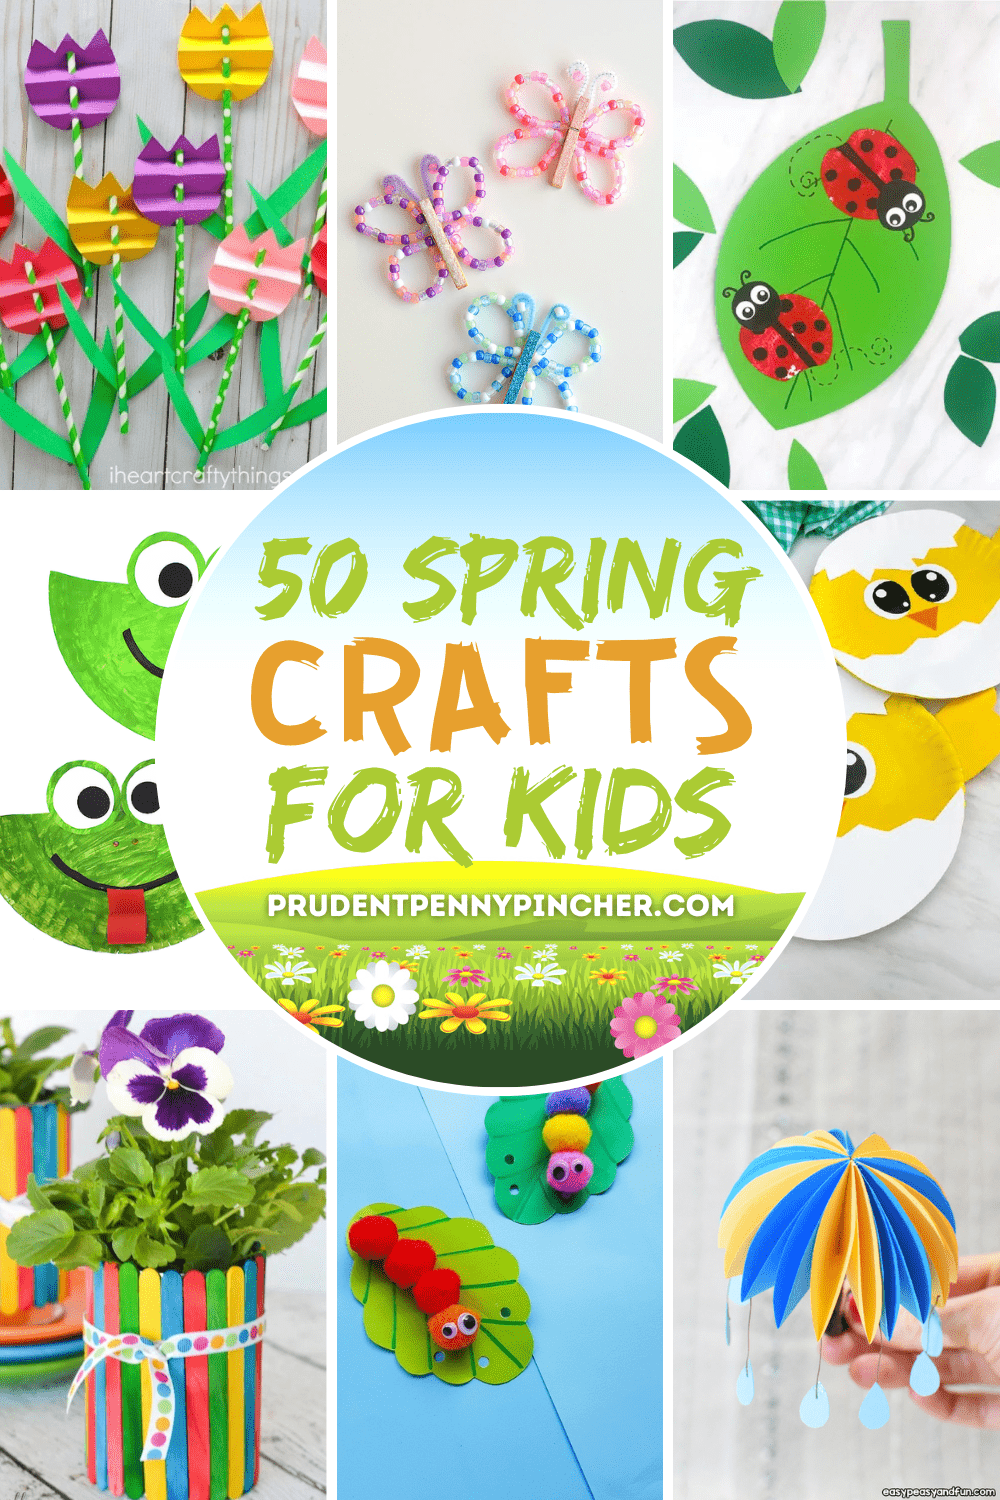 Easy Spring Crafts for Kids: Ideas for All Ages - Happy Toddler